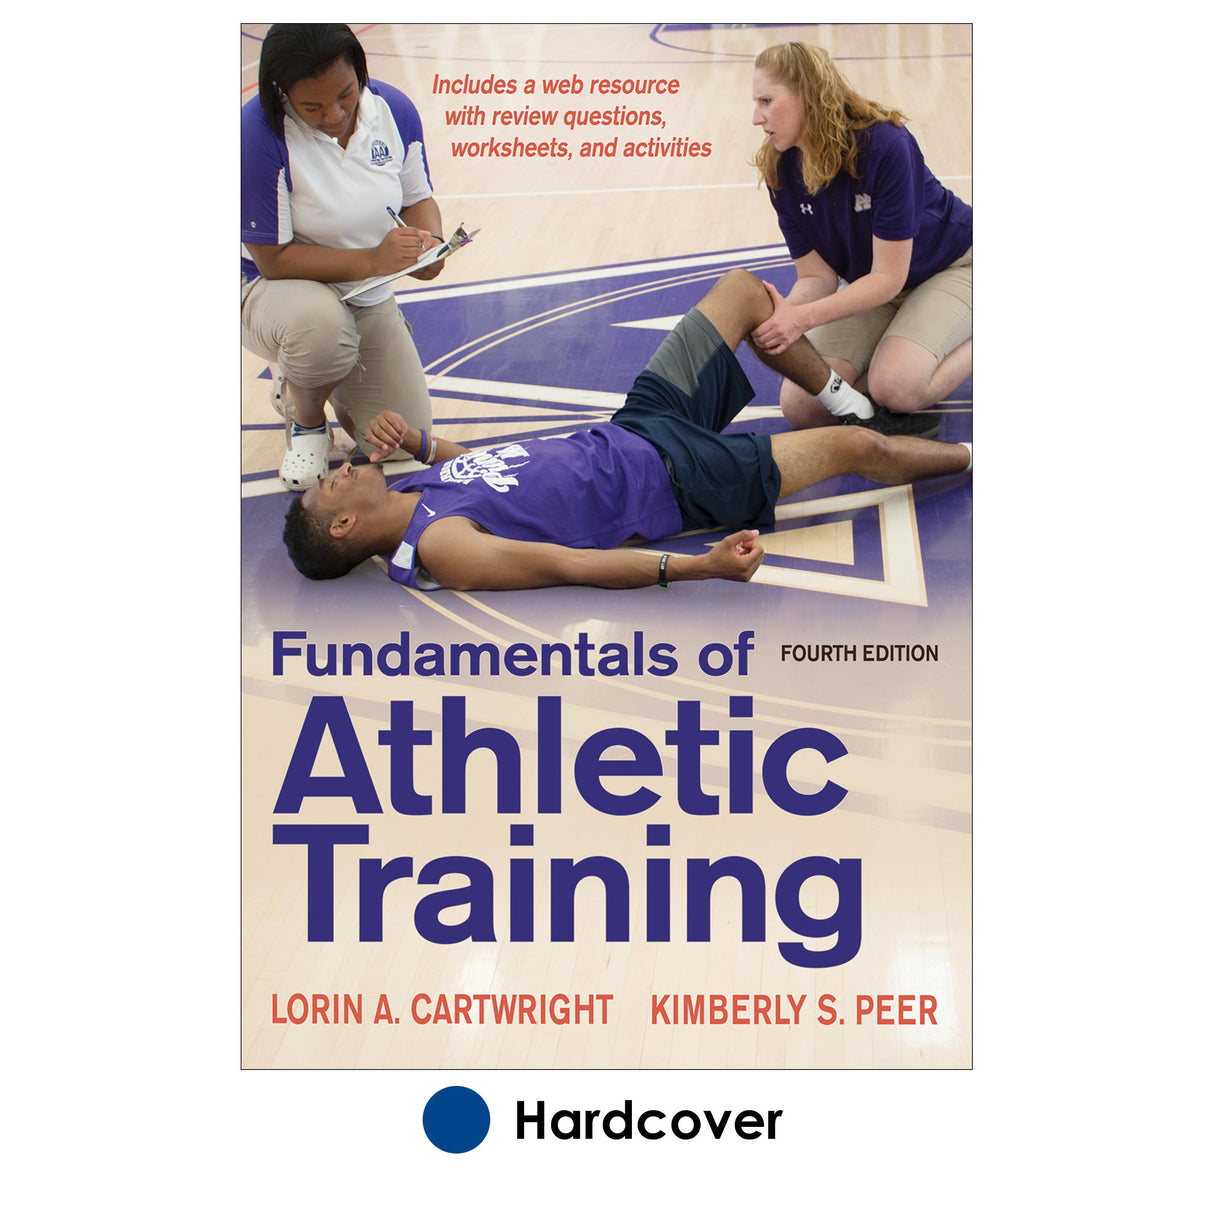 Fundamentals of Athletic Training 4th Edition With Web Resource